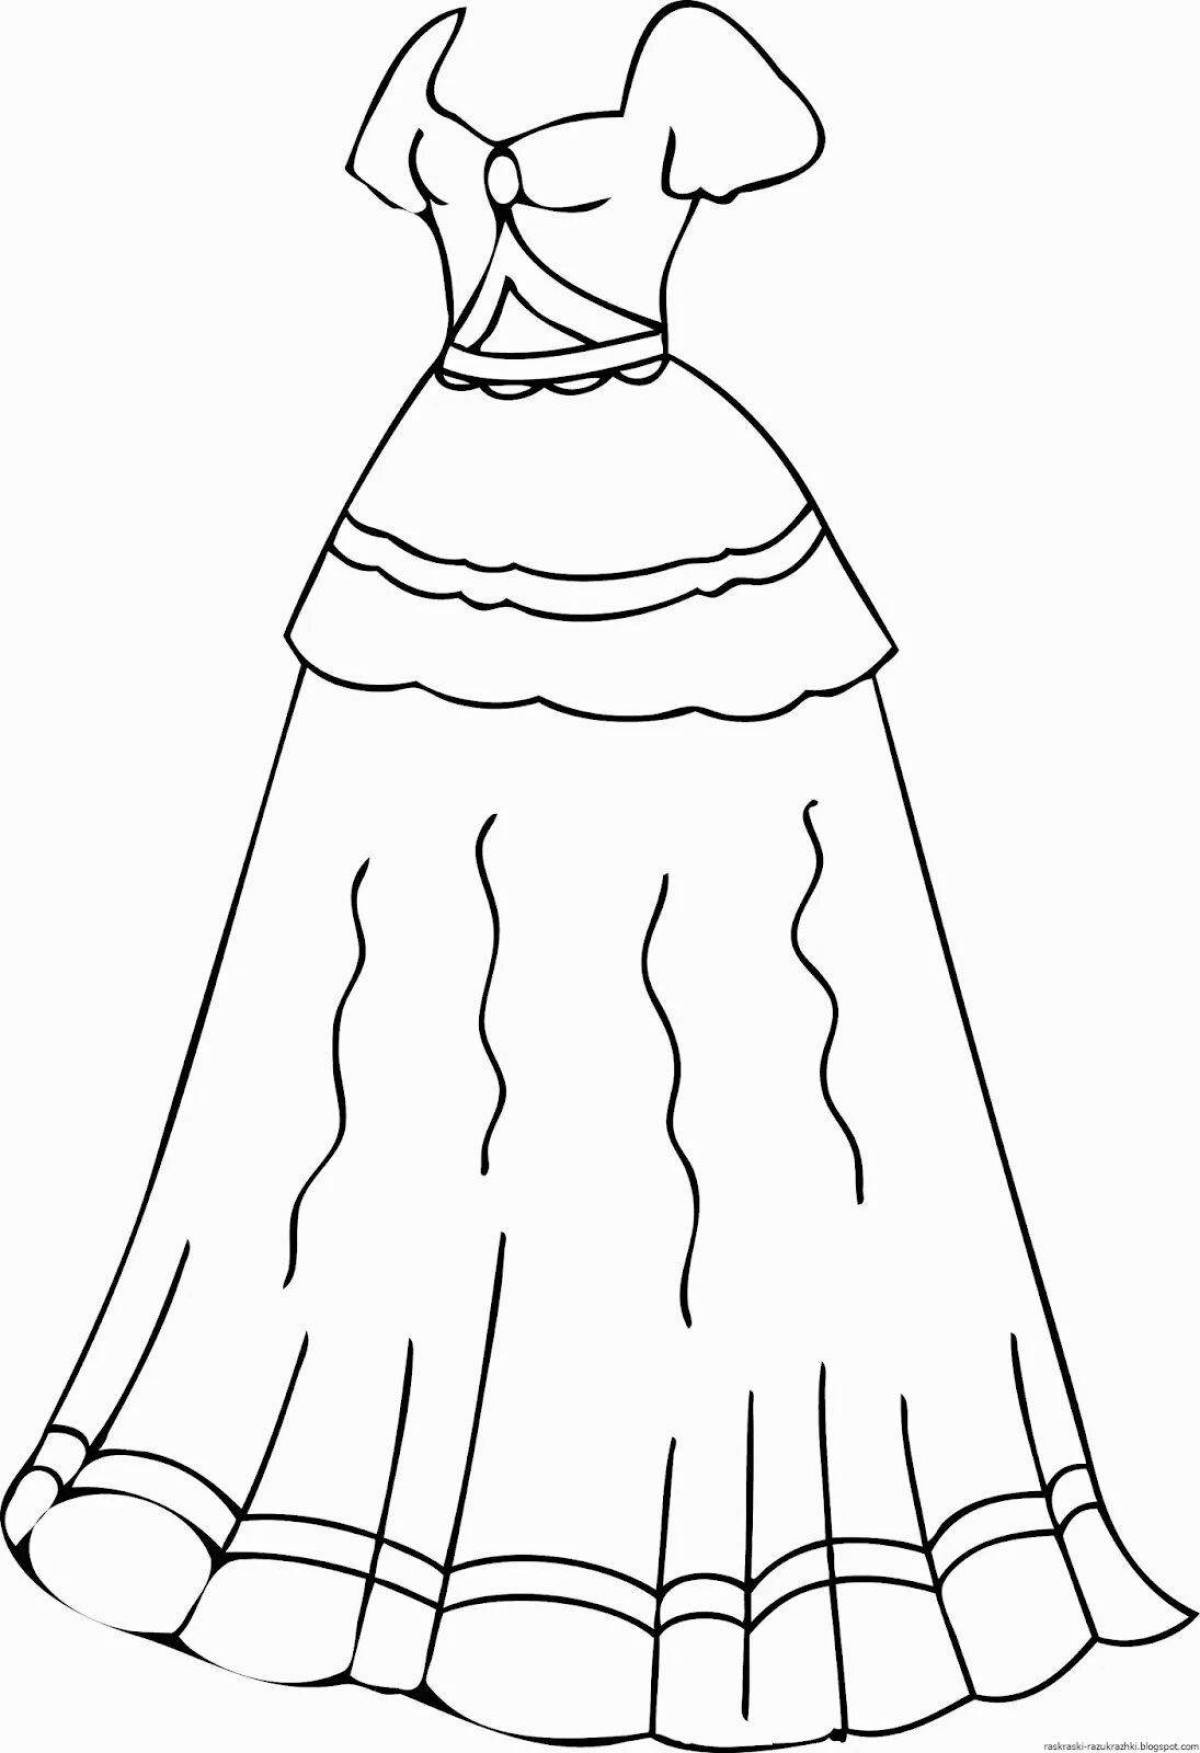 Cute dress coloring page for 4-5 year olds